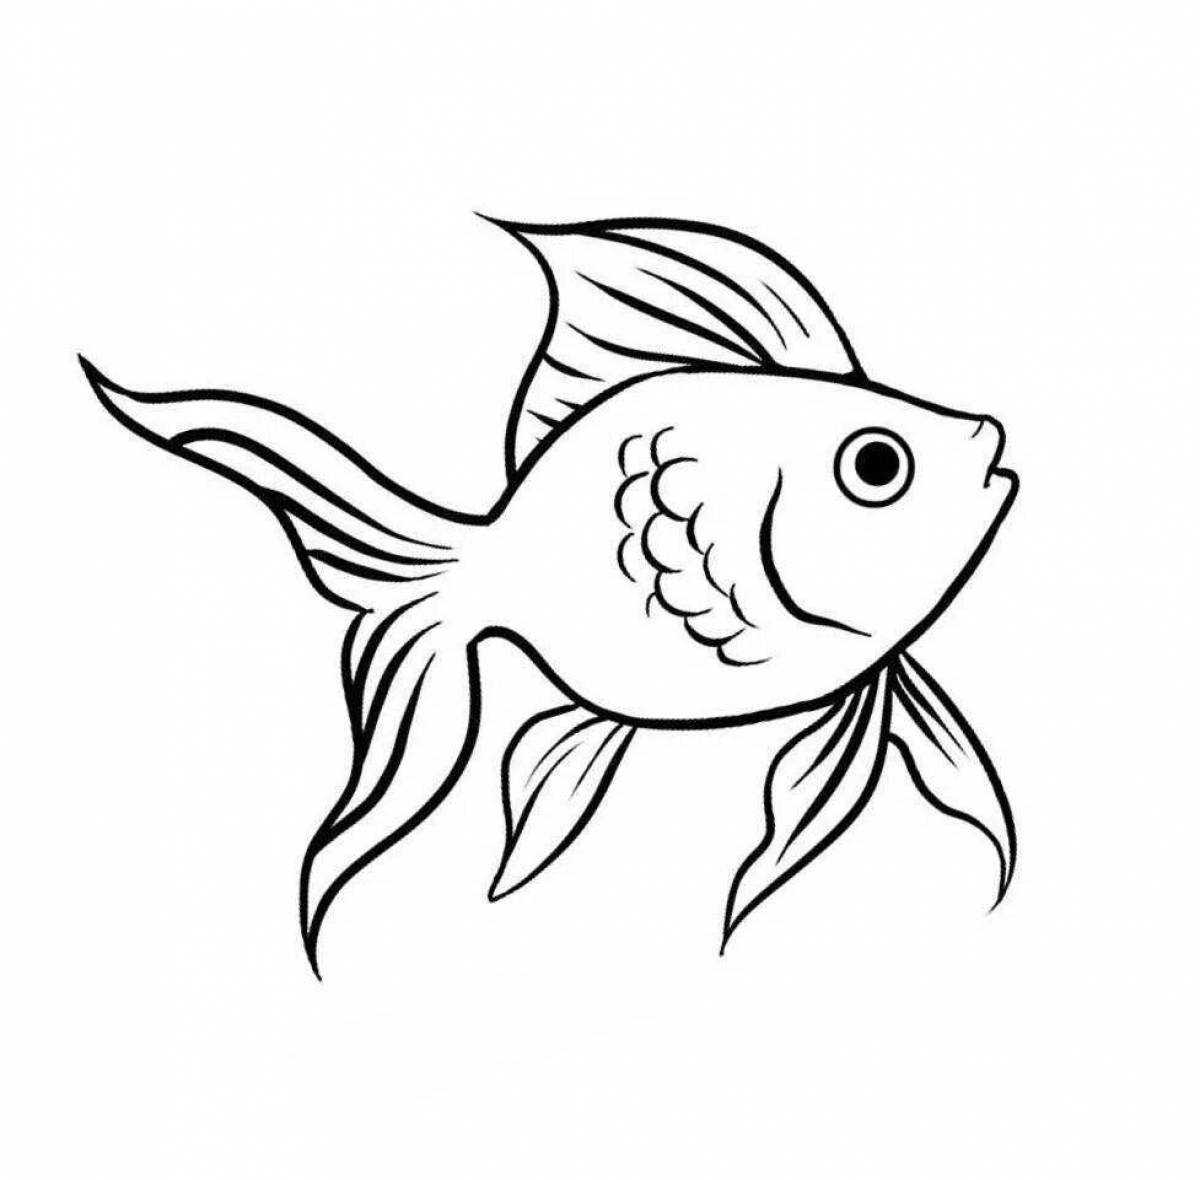 Adorable goldfish coloring book for kids